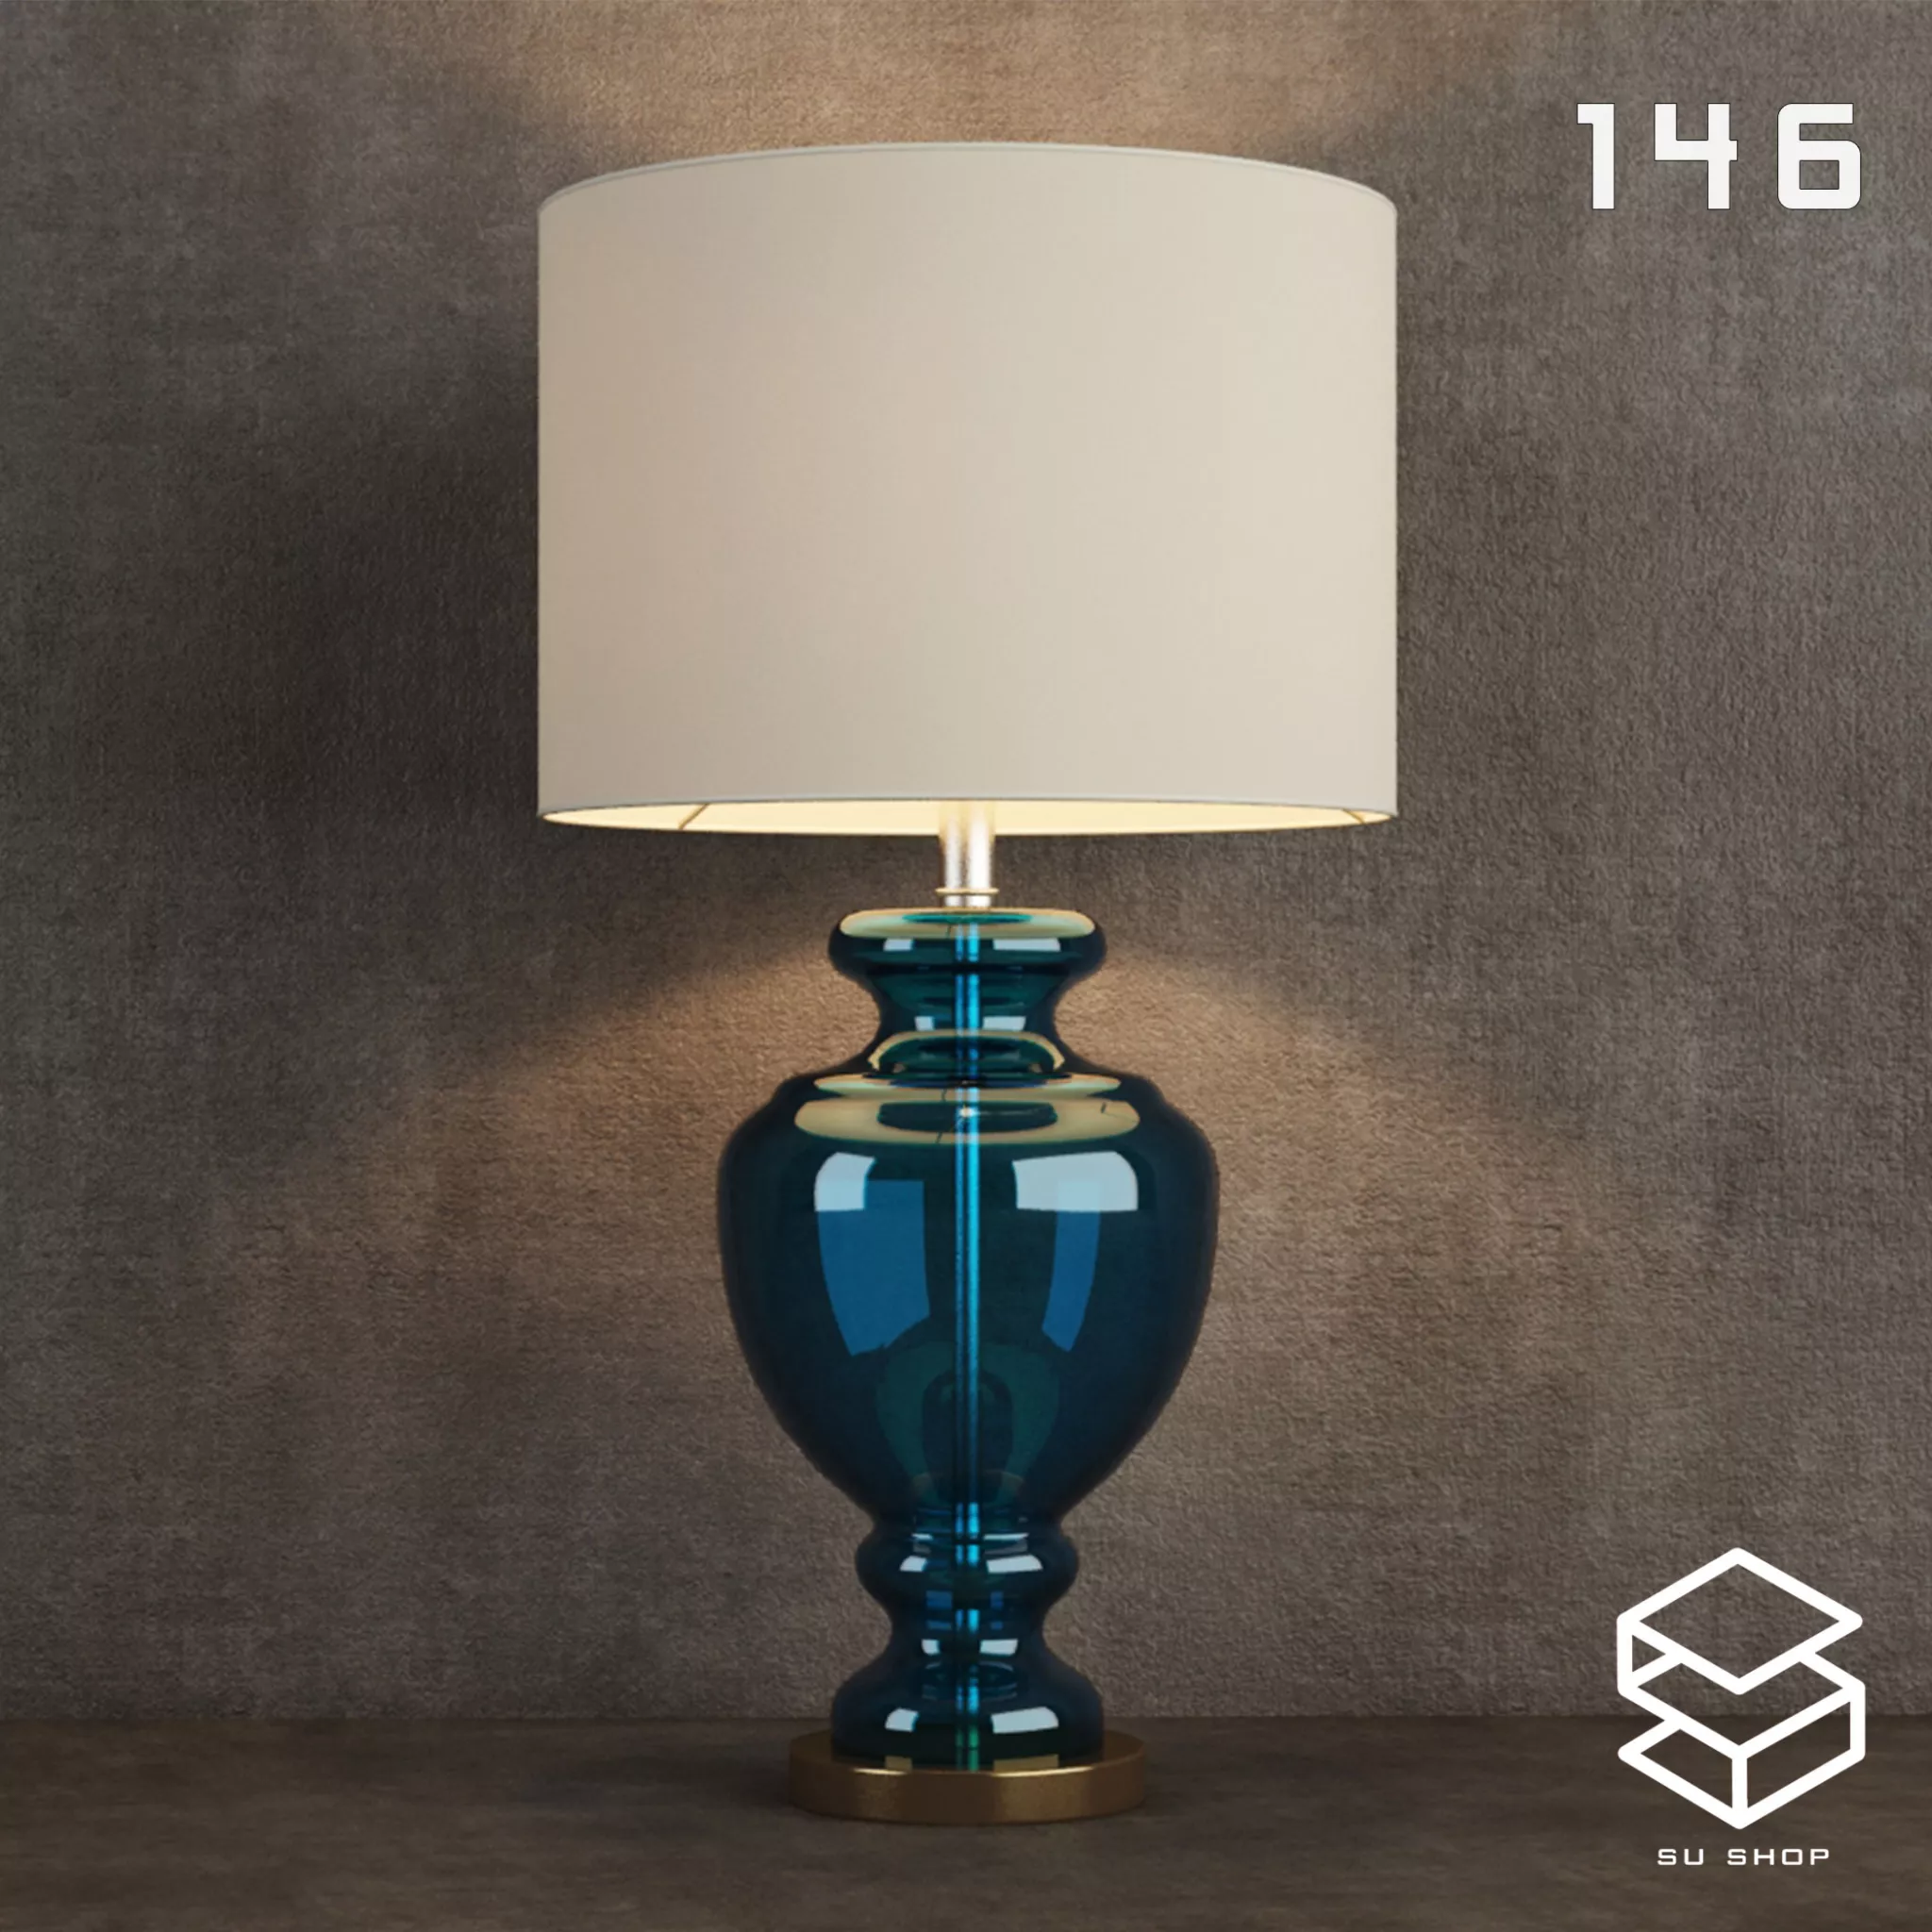 MODERN TABLE LAMP - SKETCHUP 3D MODEL - VRAY OR ENSCAPE - ID14715